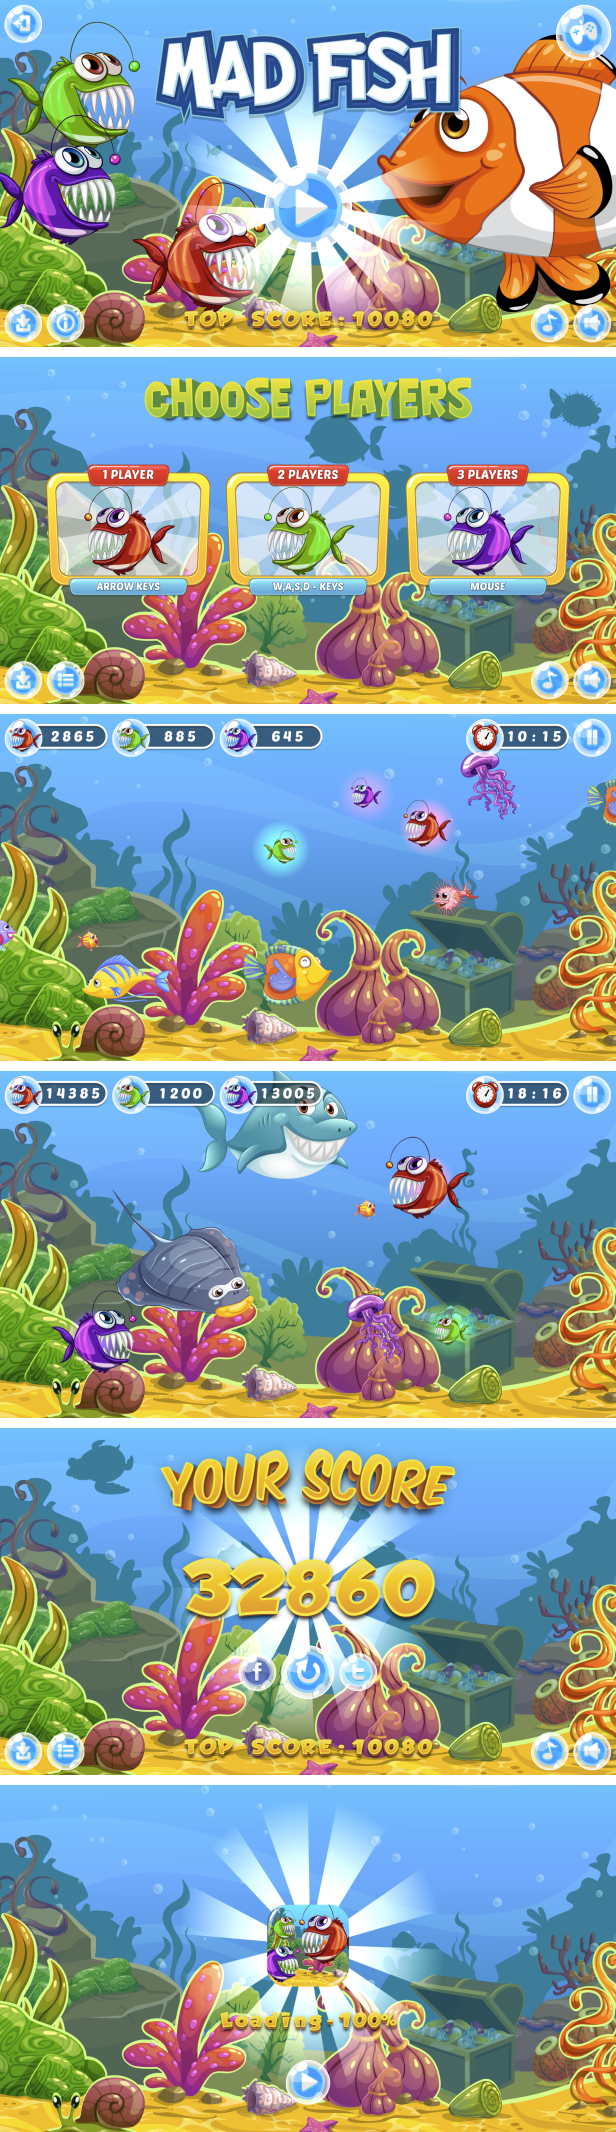 Mad Fish - HTML5 Game, Mobile Version + AdMob!!! (Construct 3 | Construct 2 | Capx) - 2